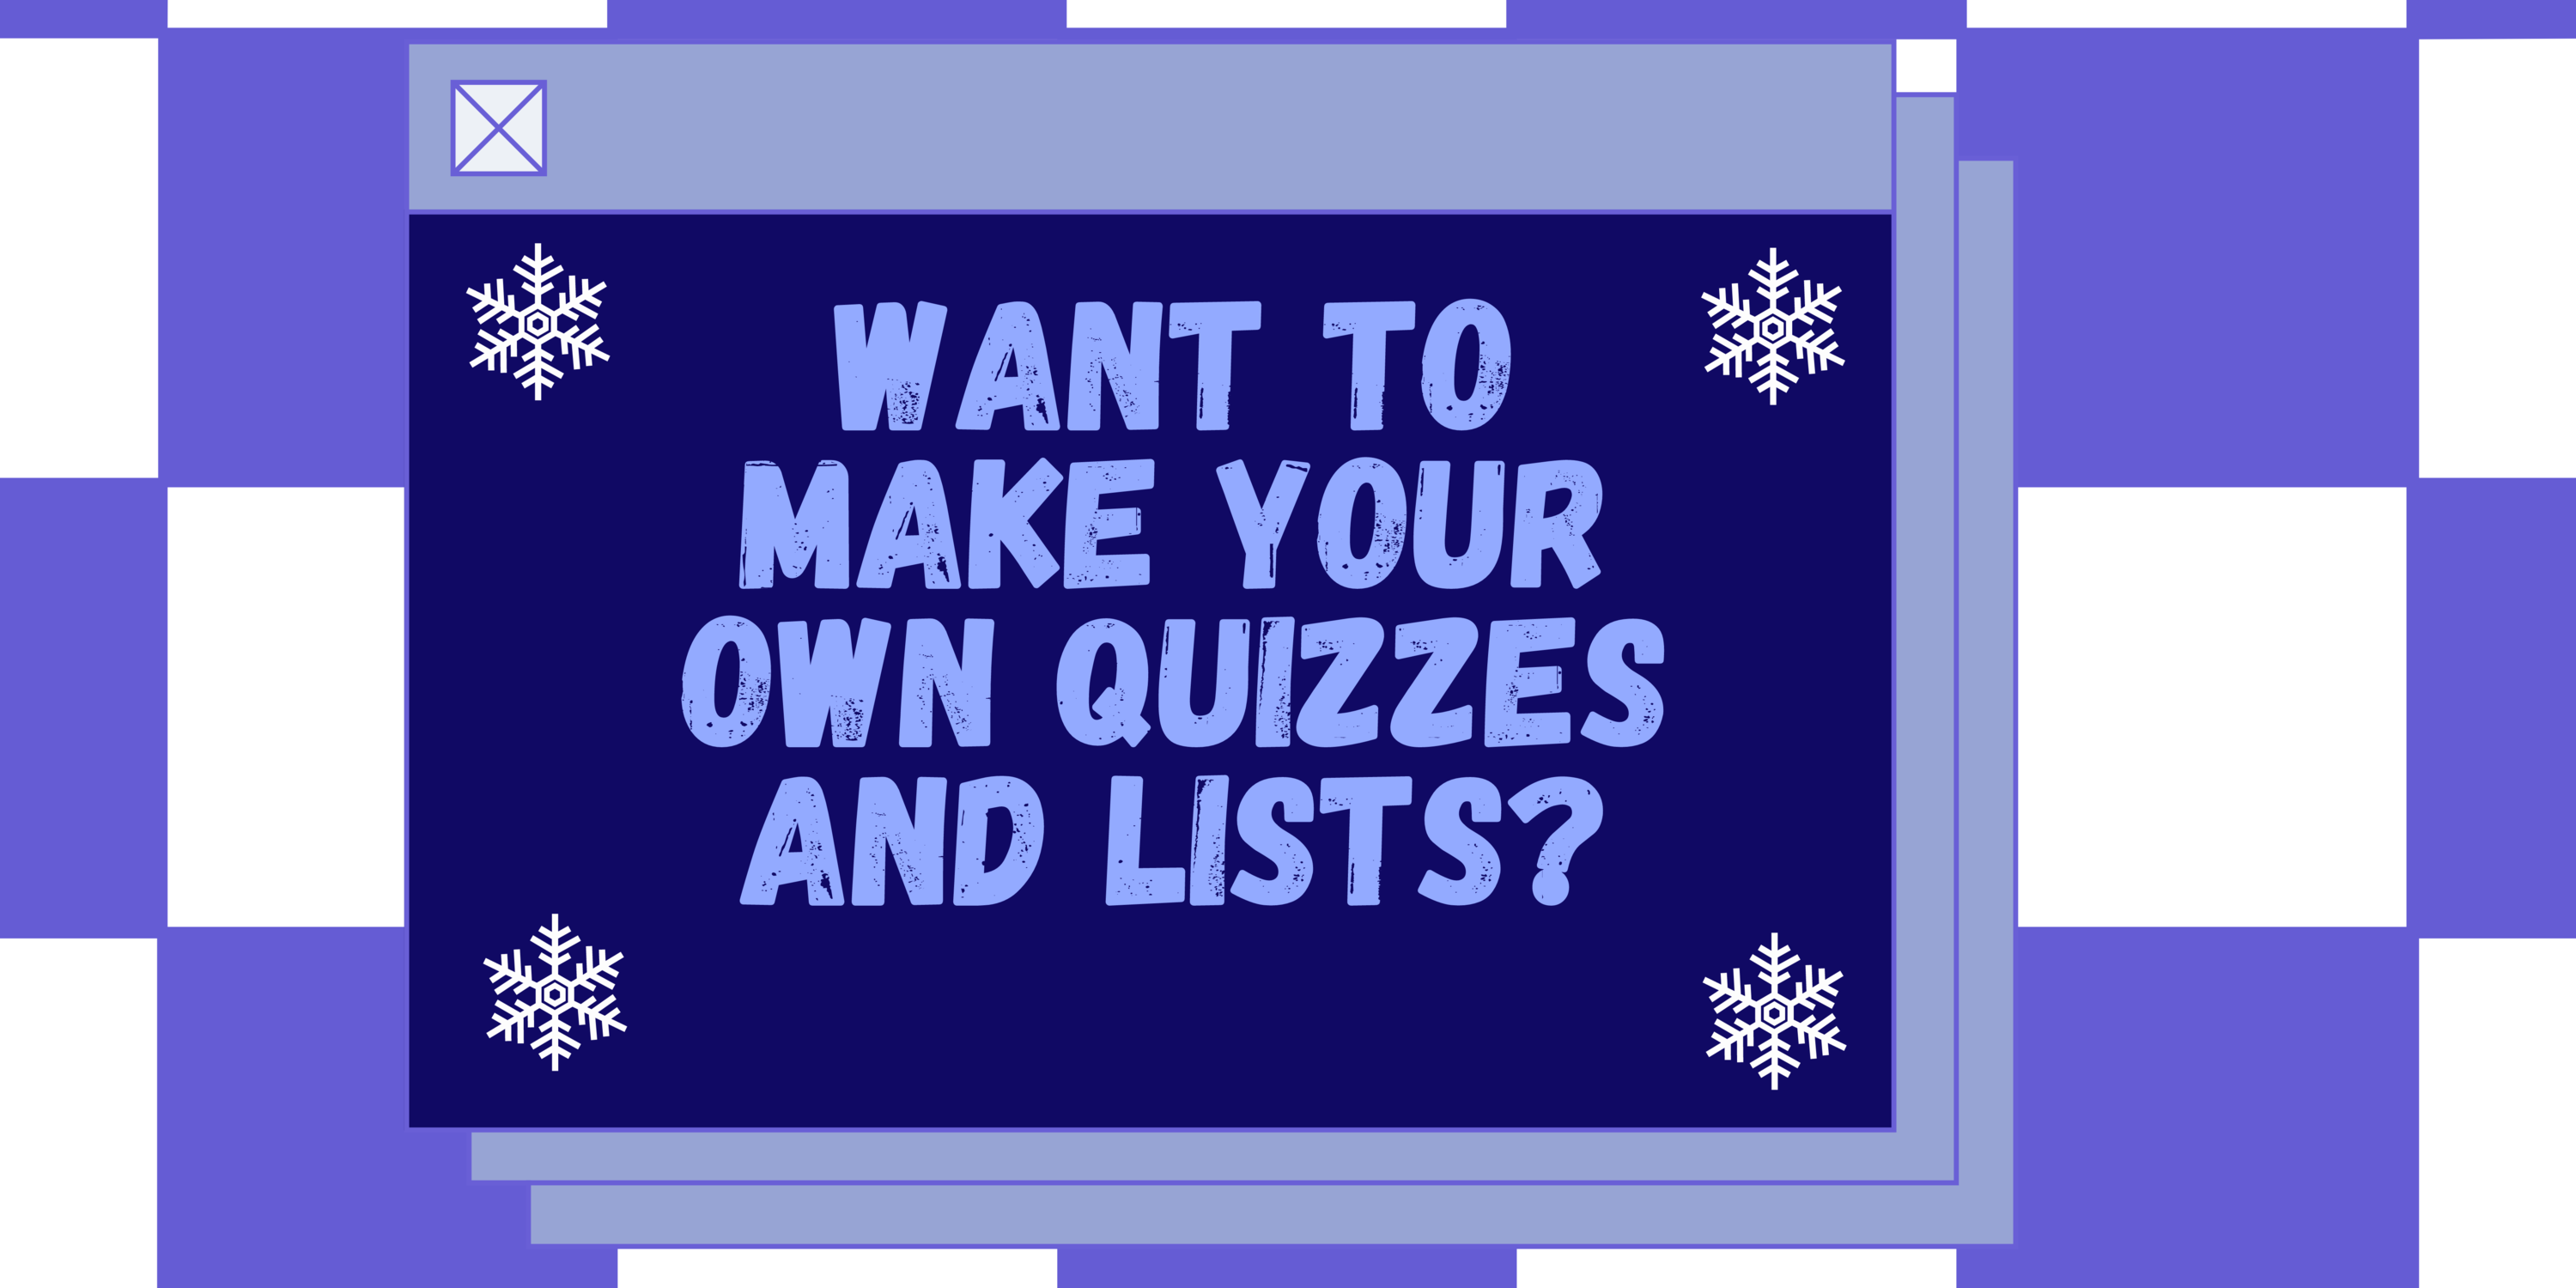 want to make your own quizzes and lists?